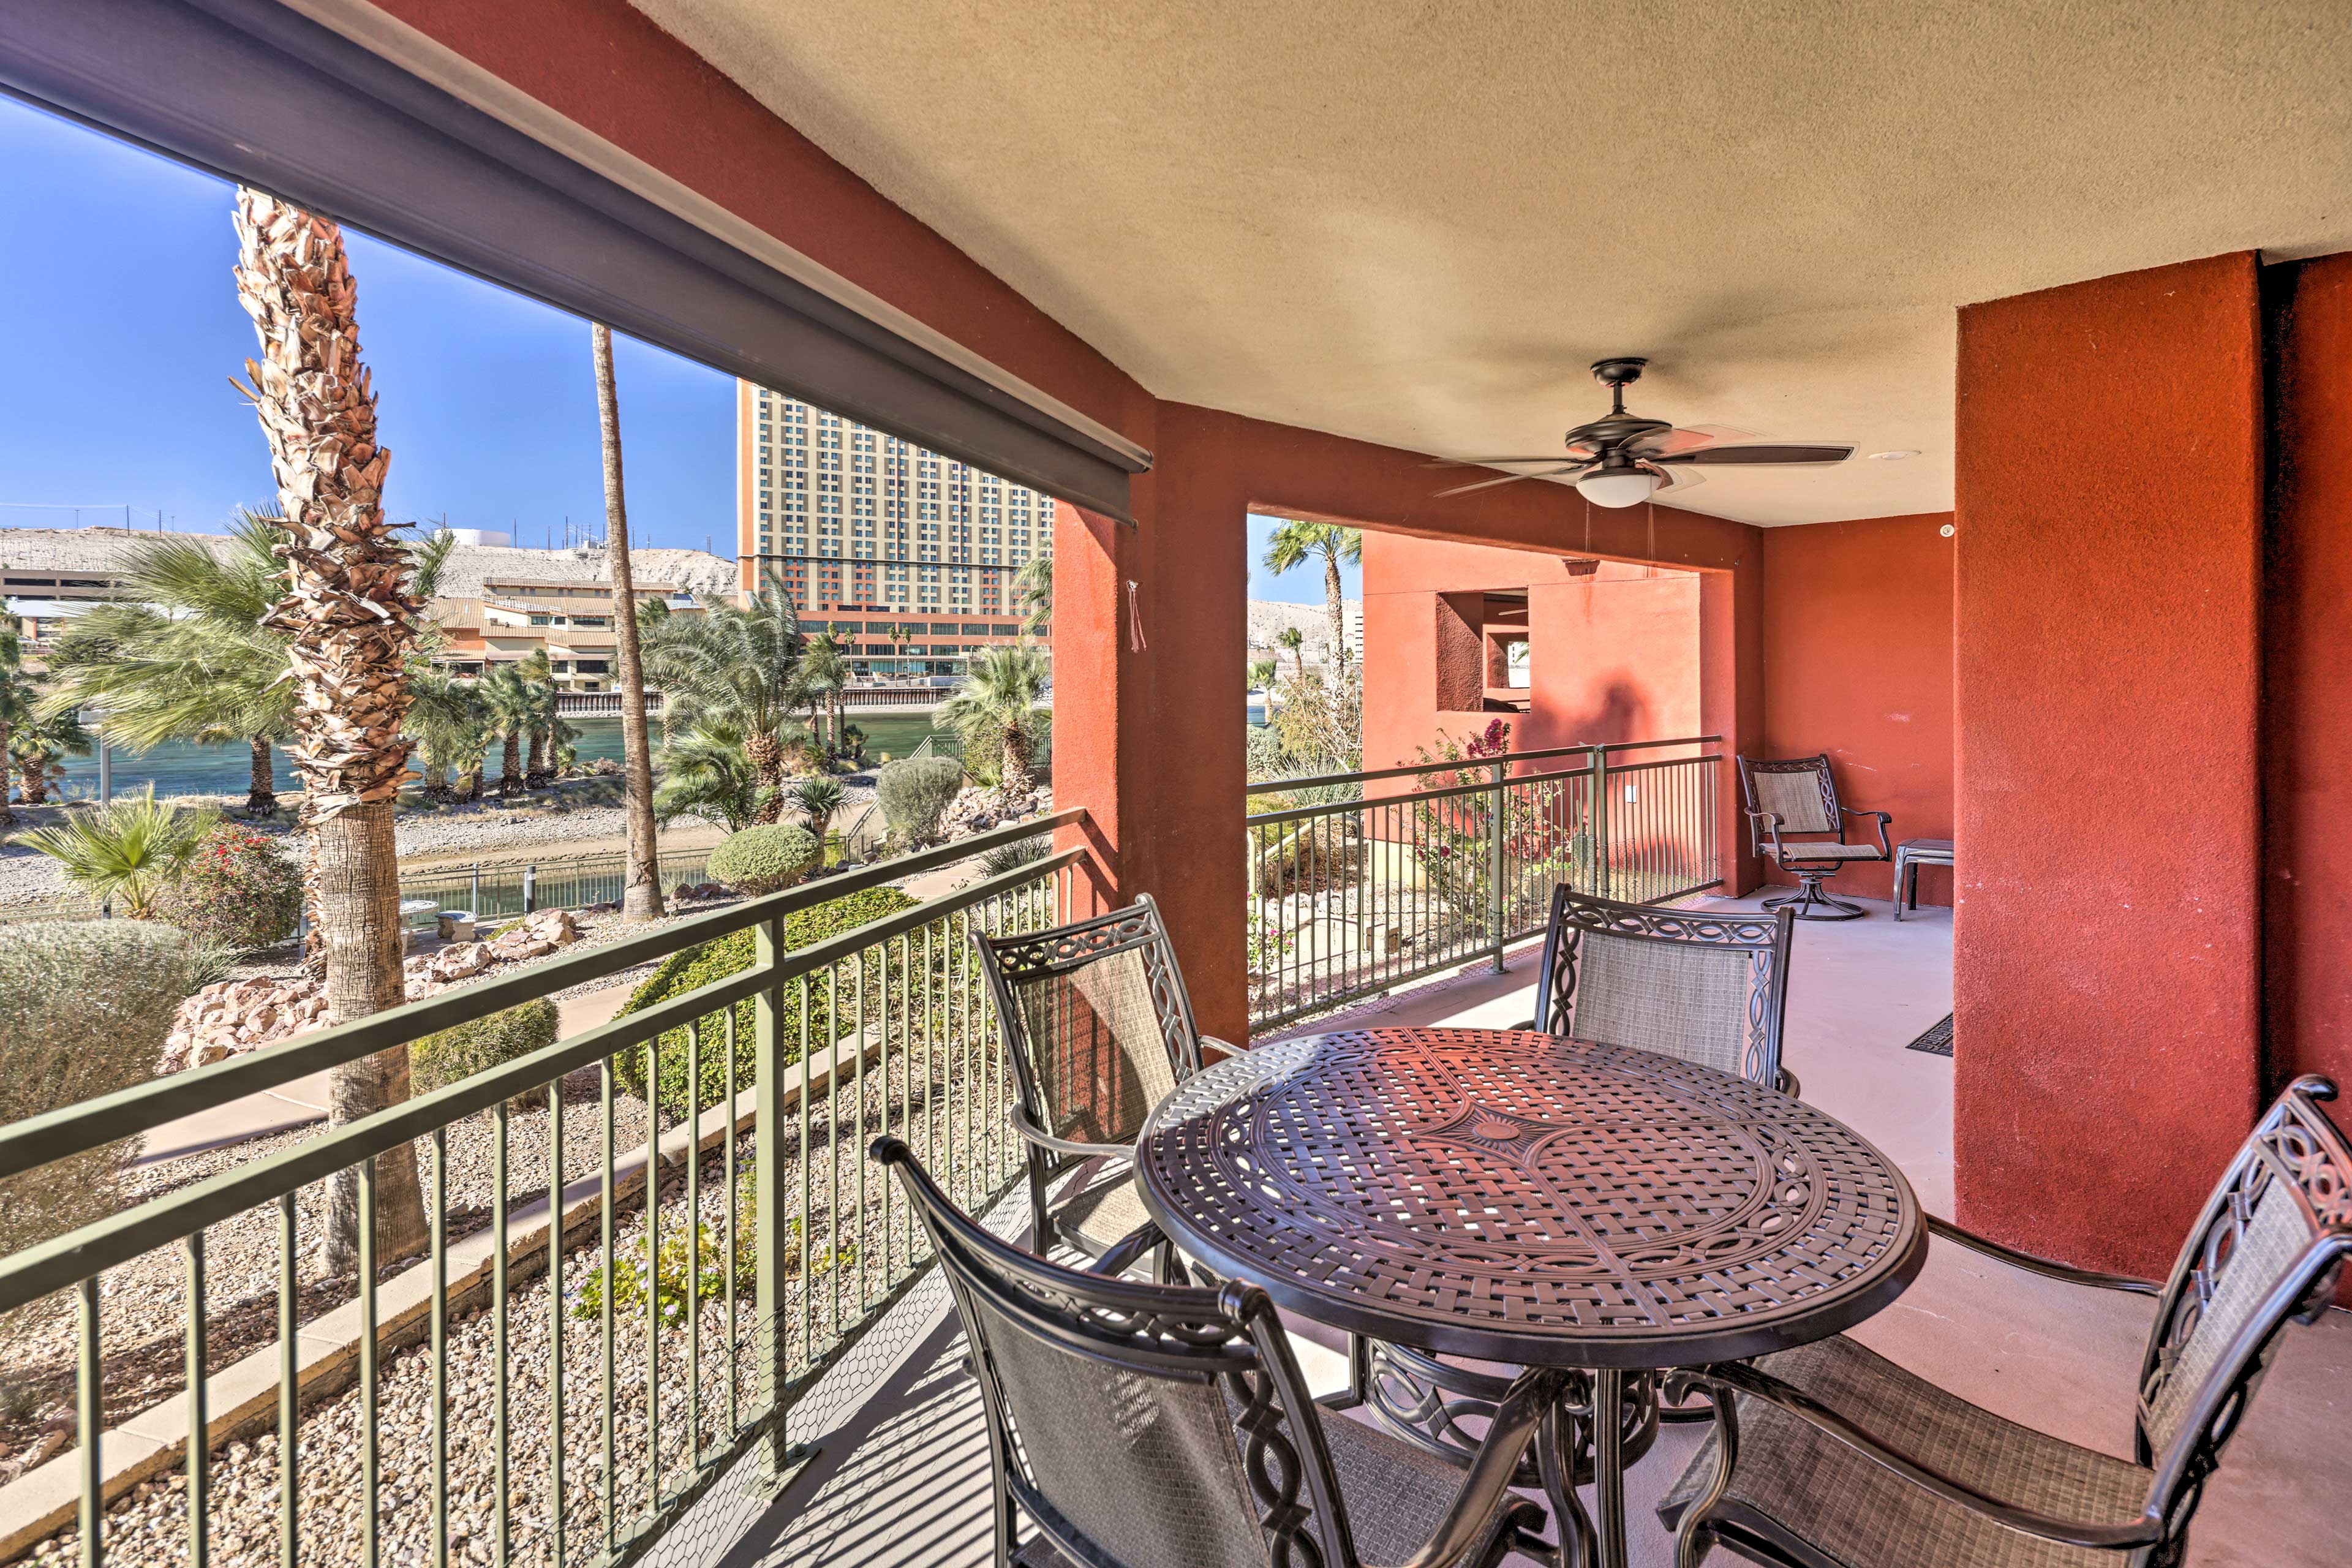 Patio | Free WiFi | 1 Exterior Security Camera (Facing Out) | Towels & Linens